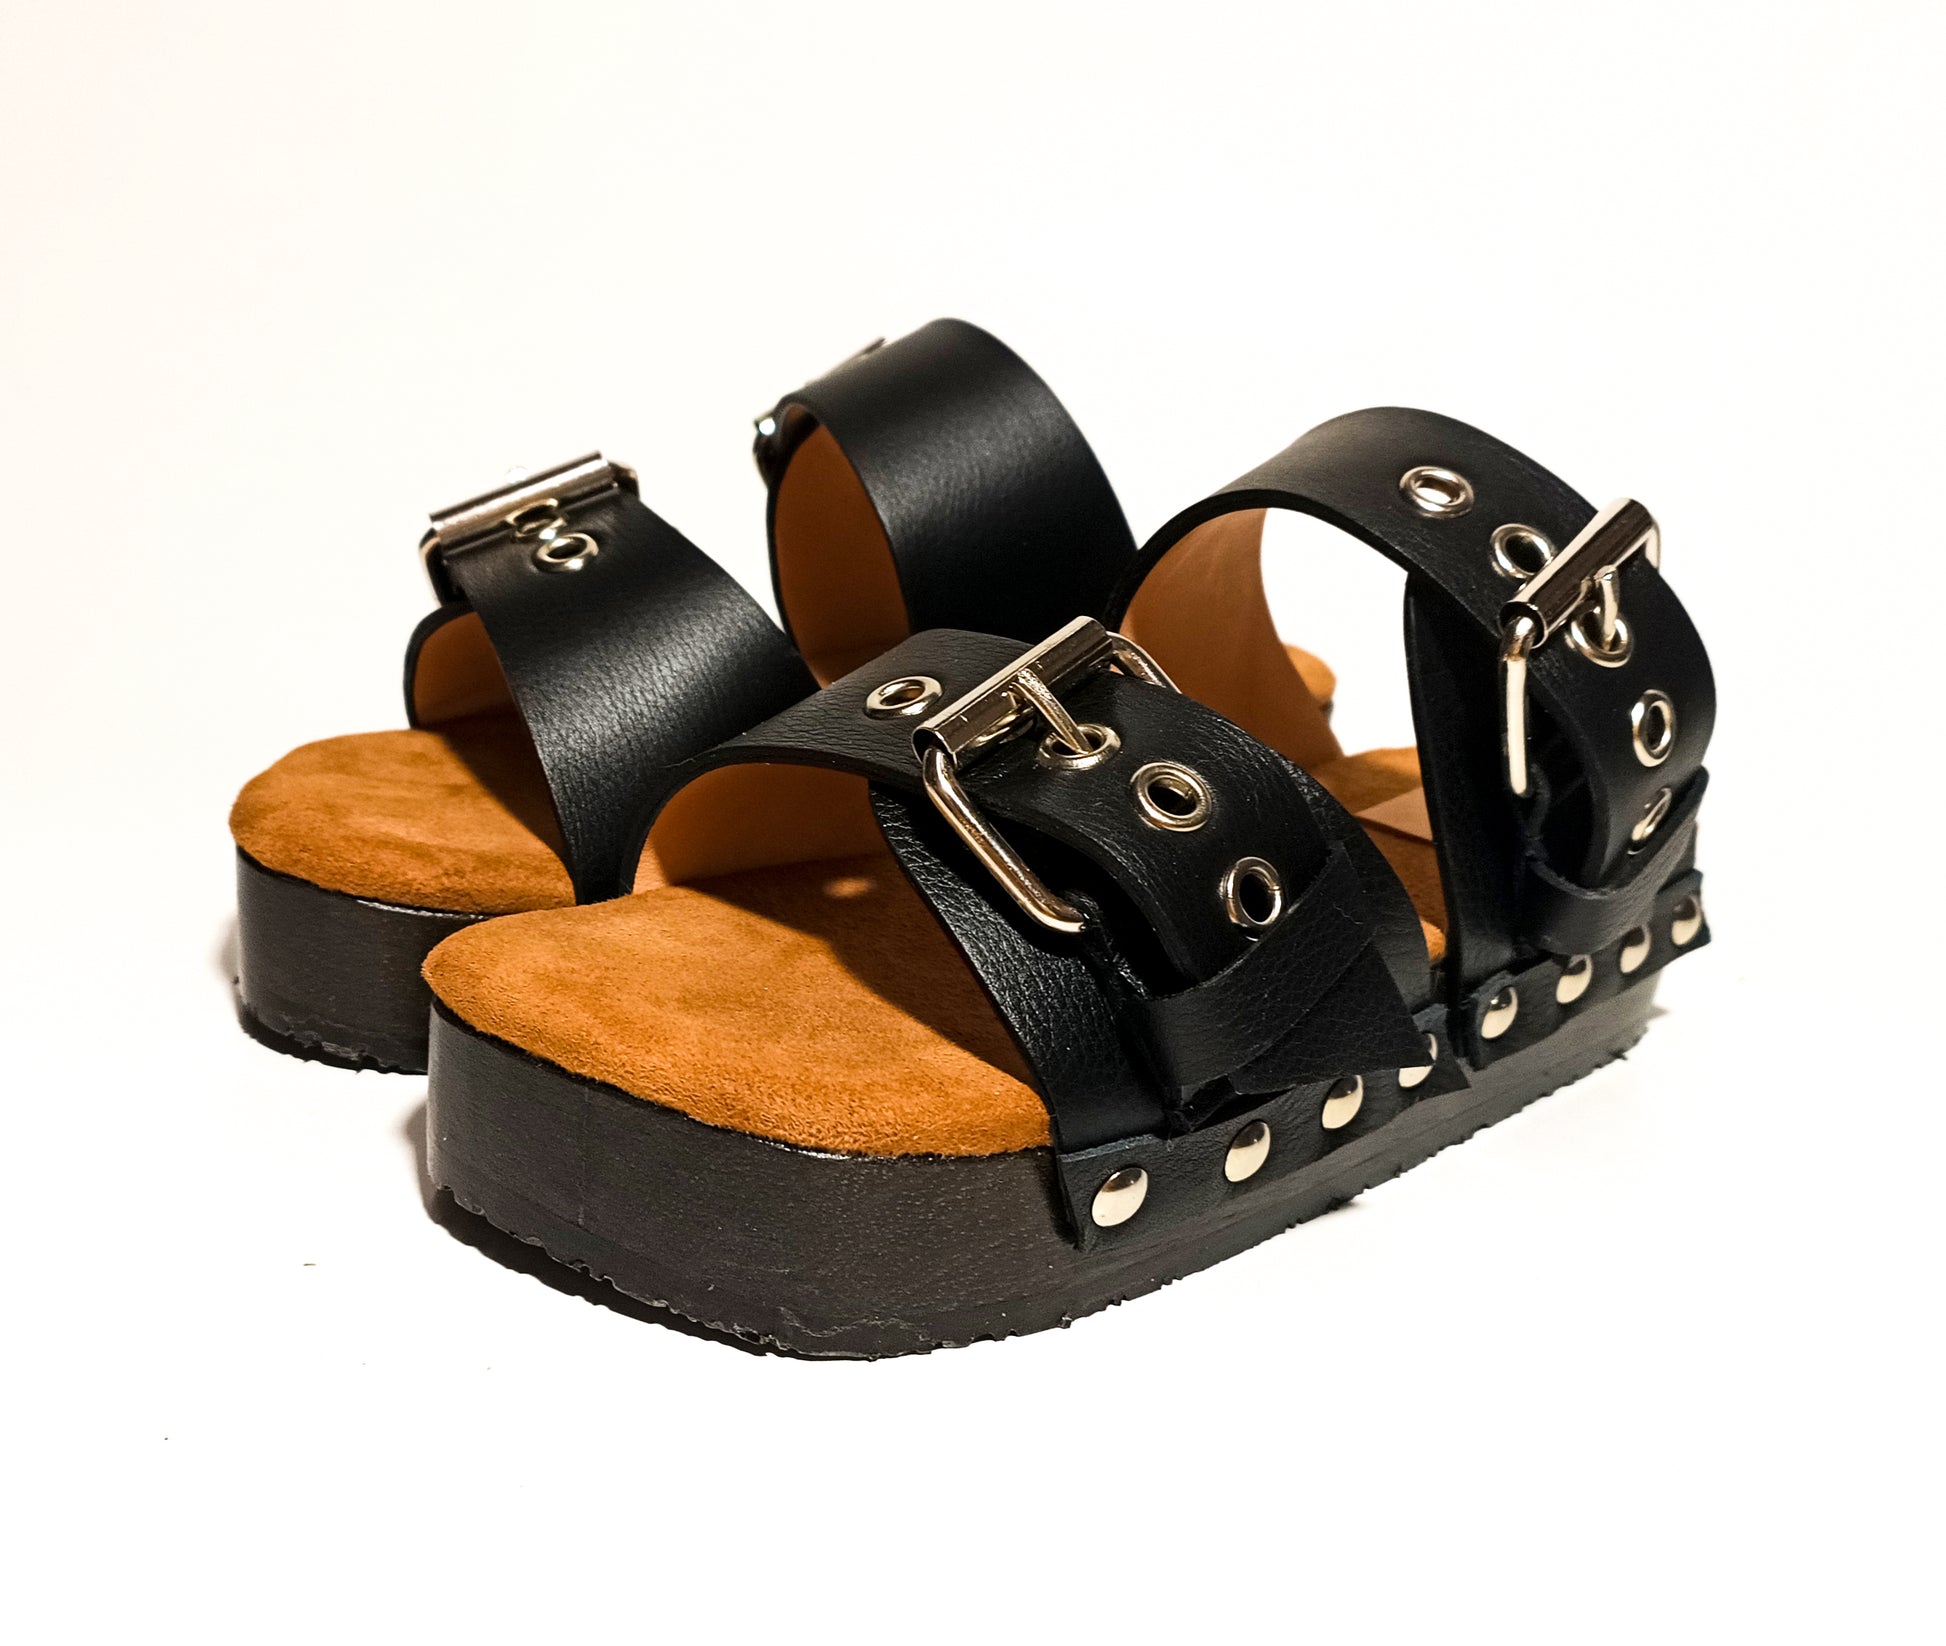 Leather clog sandal with buckles. Clog sandals with buckles and wooden wedge. Women's leather sandals birkenstock style. Sizes 34 to 47. High quality handmade leather shoes by sol Caleyo. Sustainable fashion.